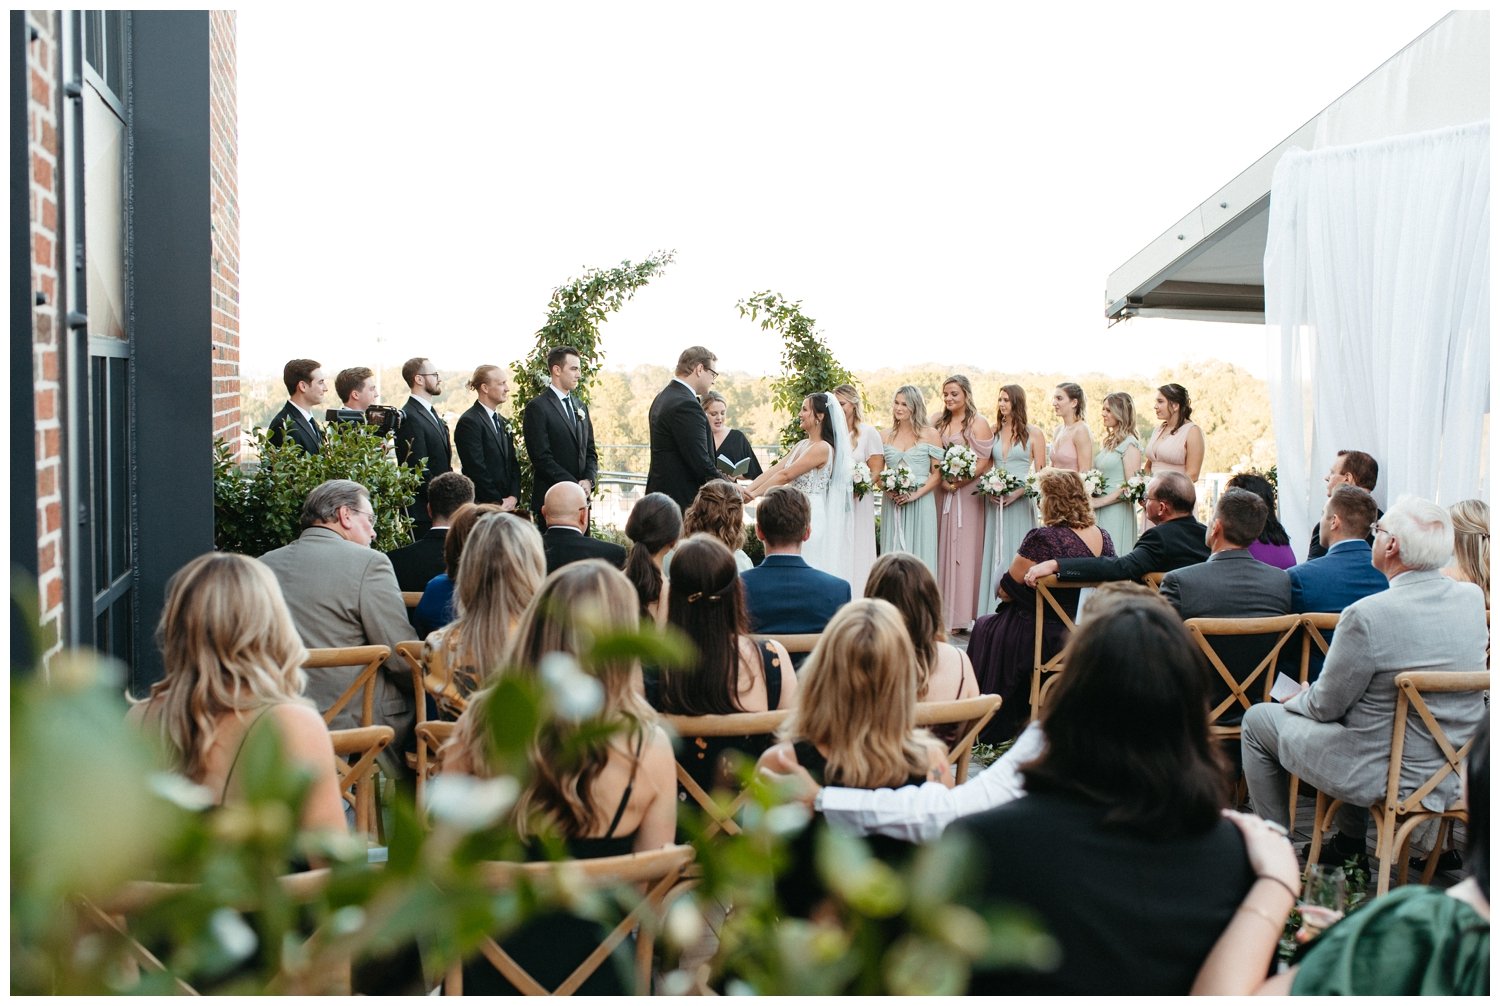 A view of the wedding ceremony at the Roof at Ponce City Market